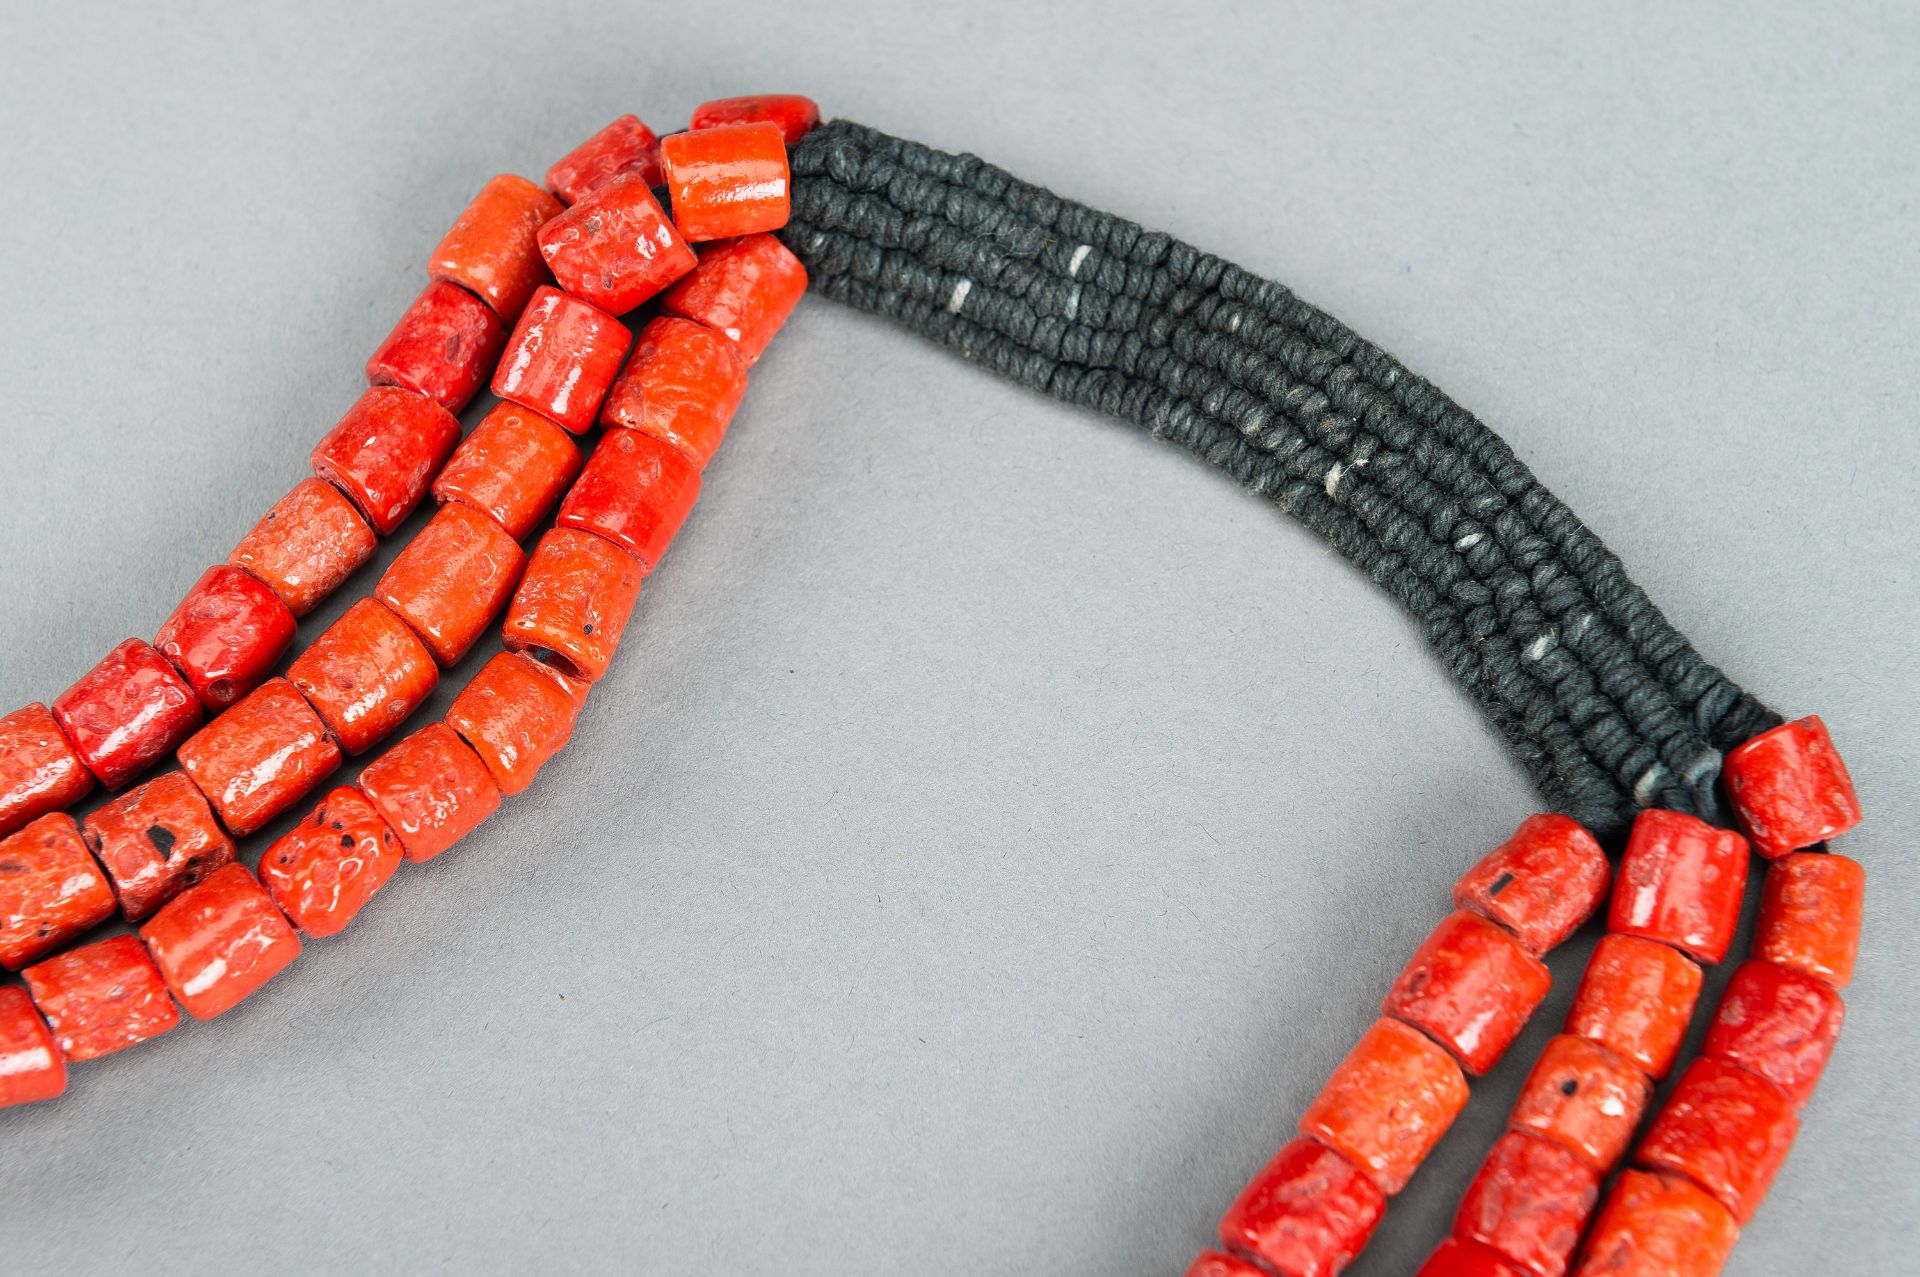 A NAGALAND 'CORAL' GLASS NECKLACE, c. 1900s - Image 6 of 9